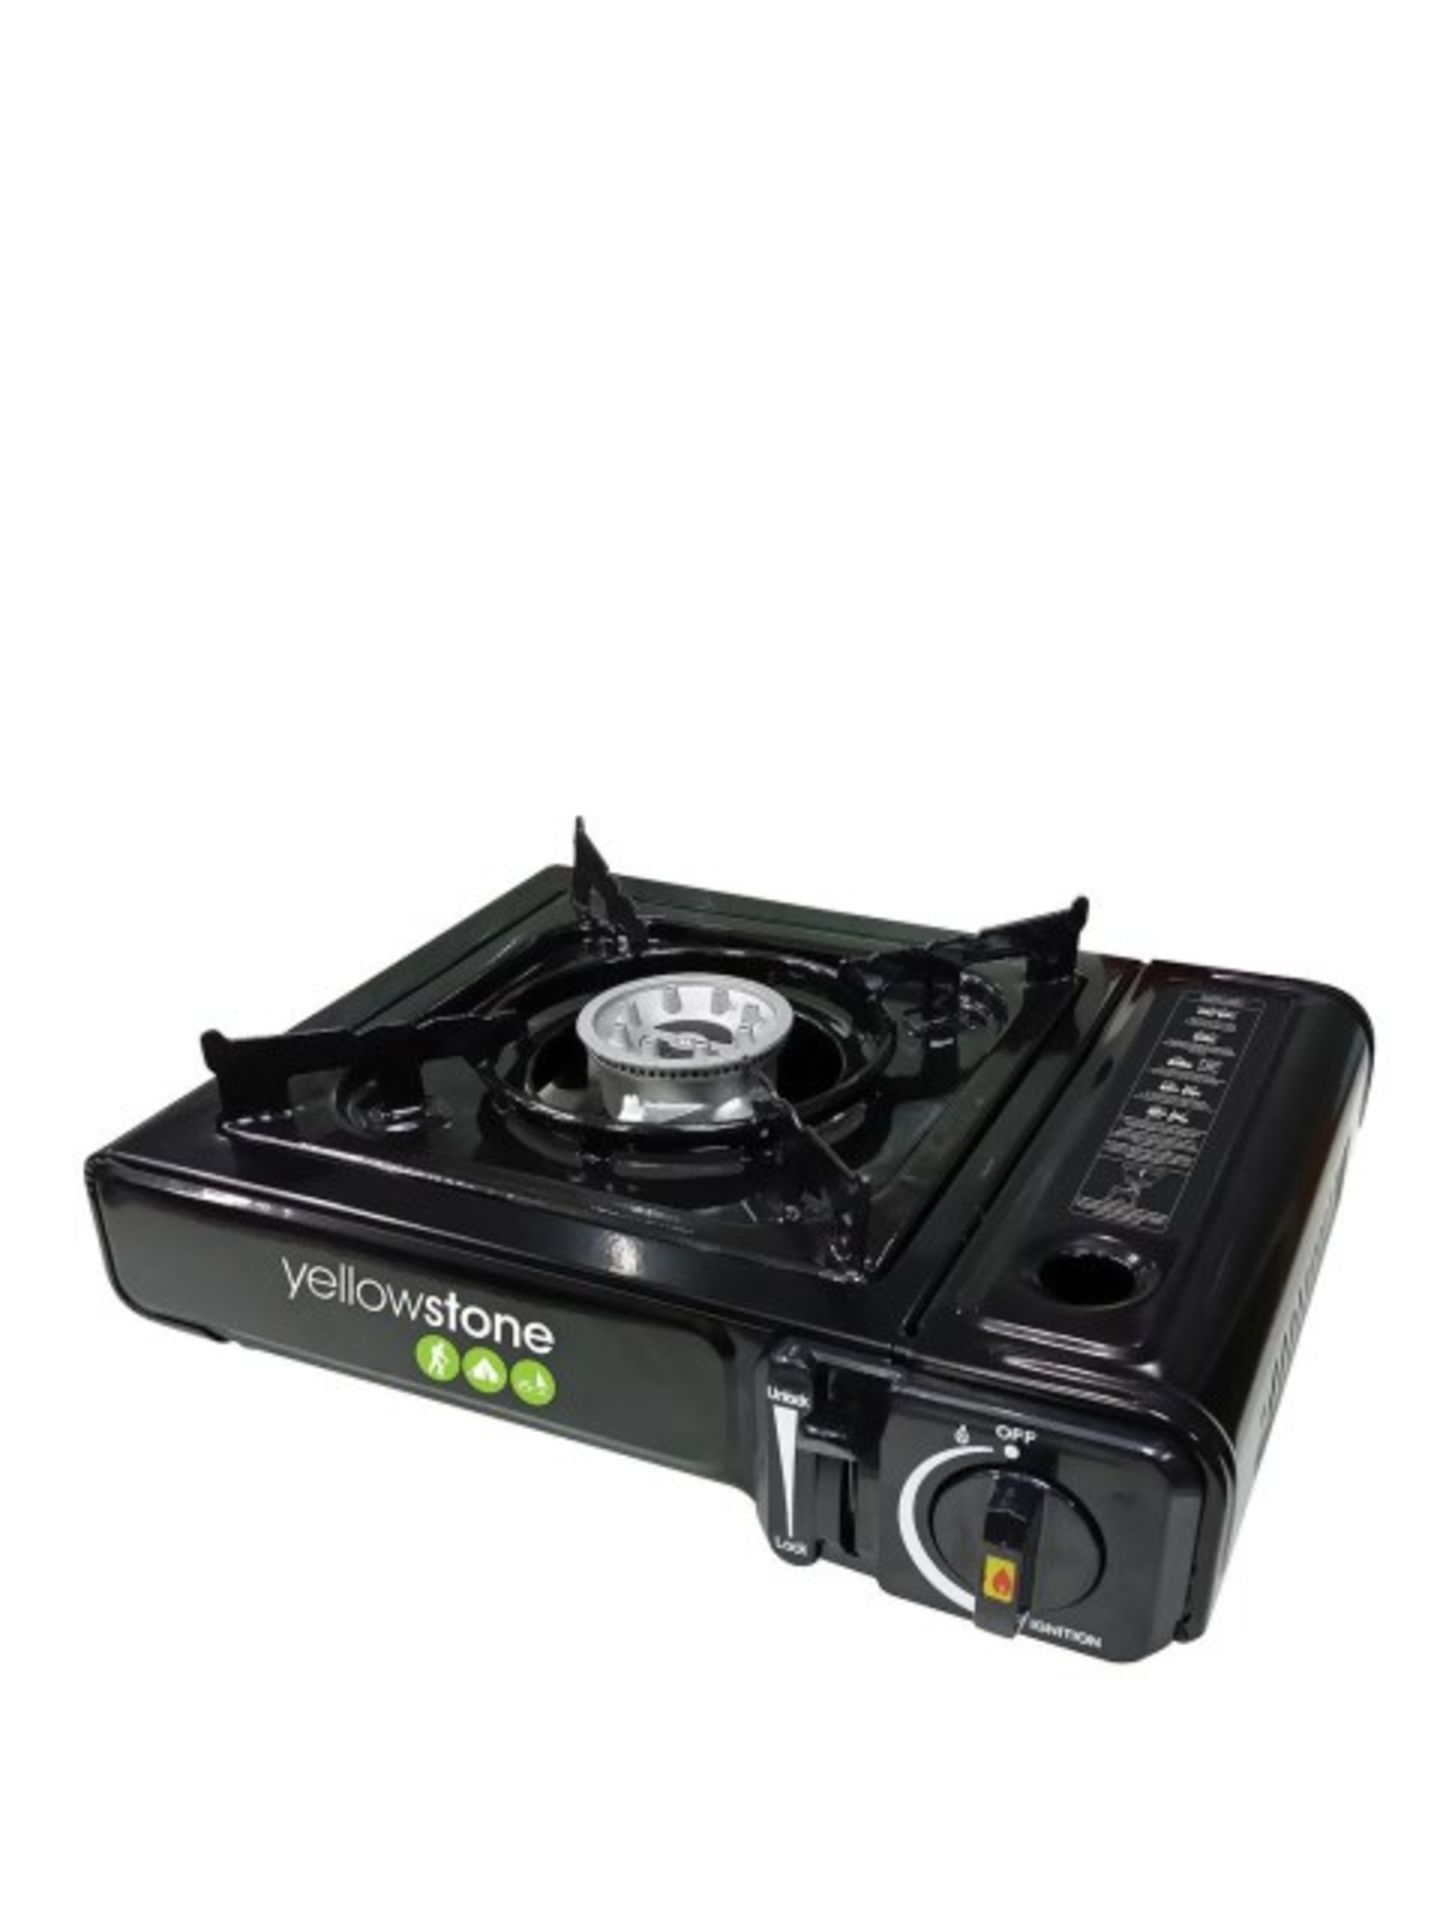 V Brand New Portable Gas Stove In Briefcase X 2 Bid price to be multiplied by Two